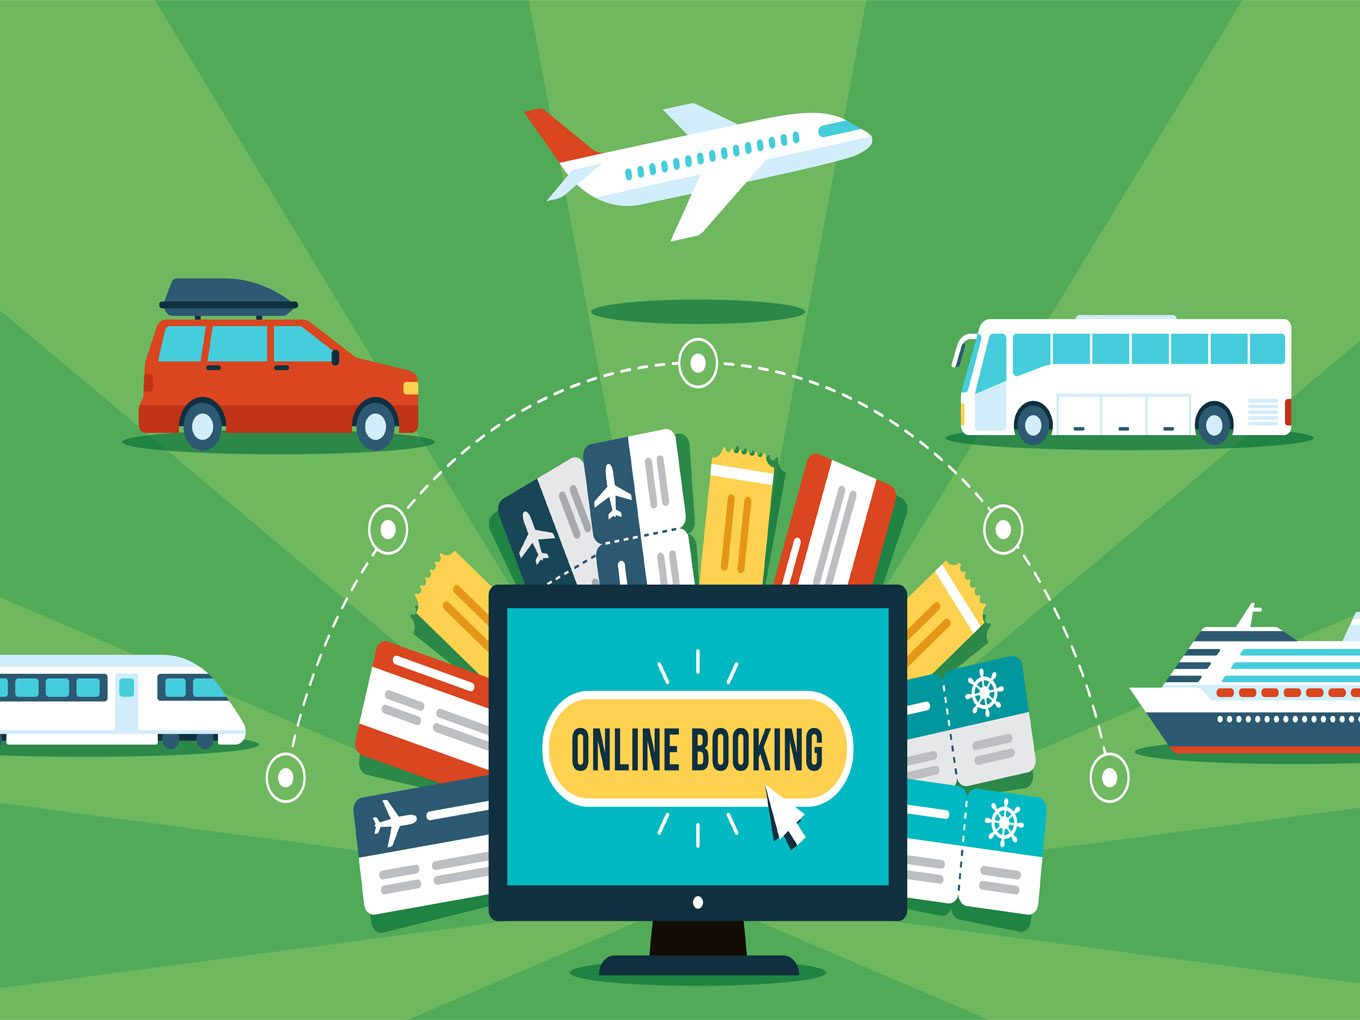 Online Travel Company Yatra Posts YoY Revenue Fall Of 6.2%, Controls Losses By 89%